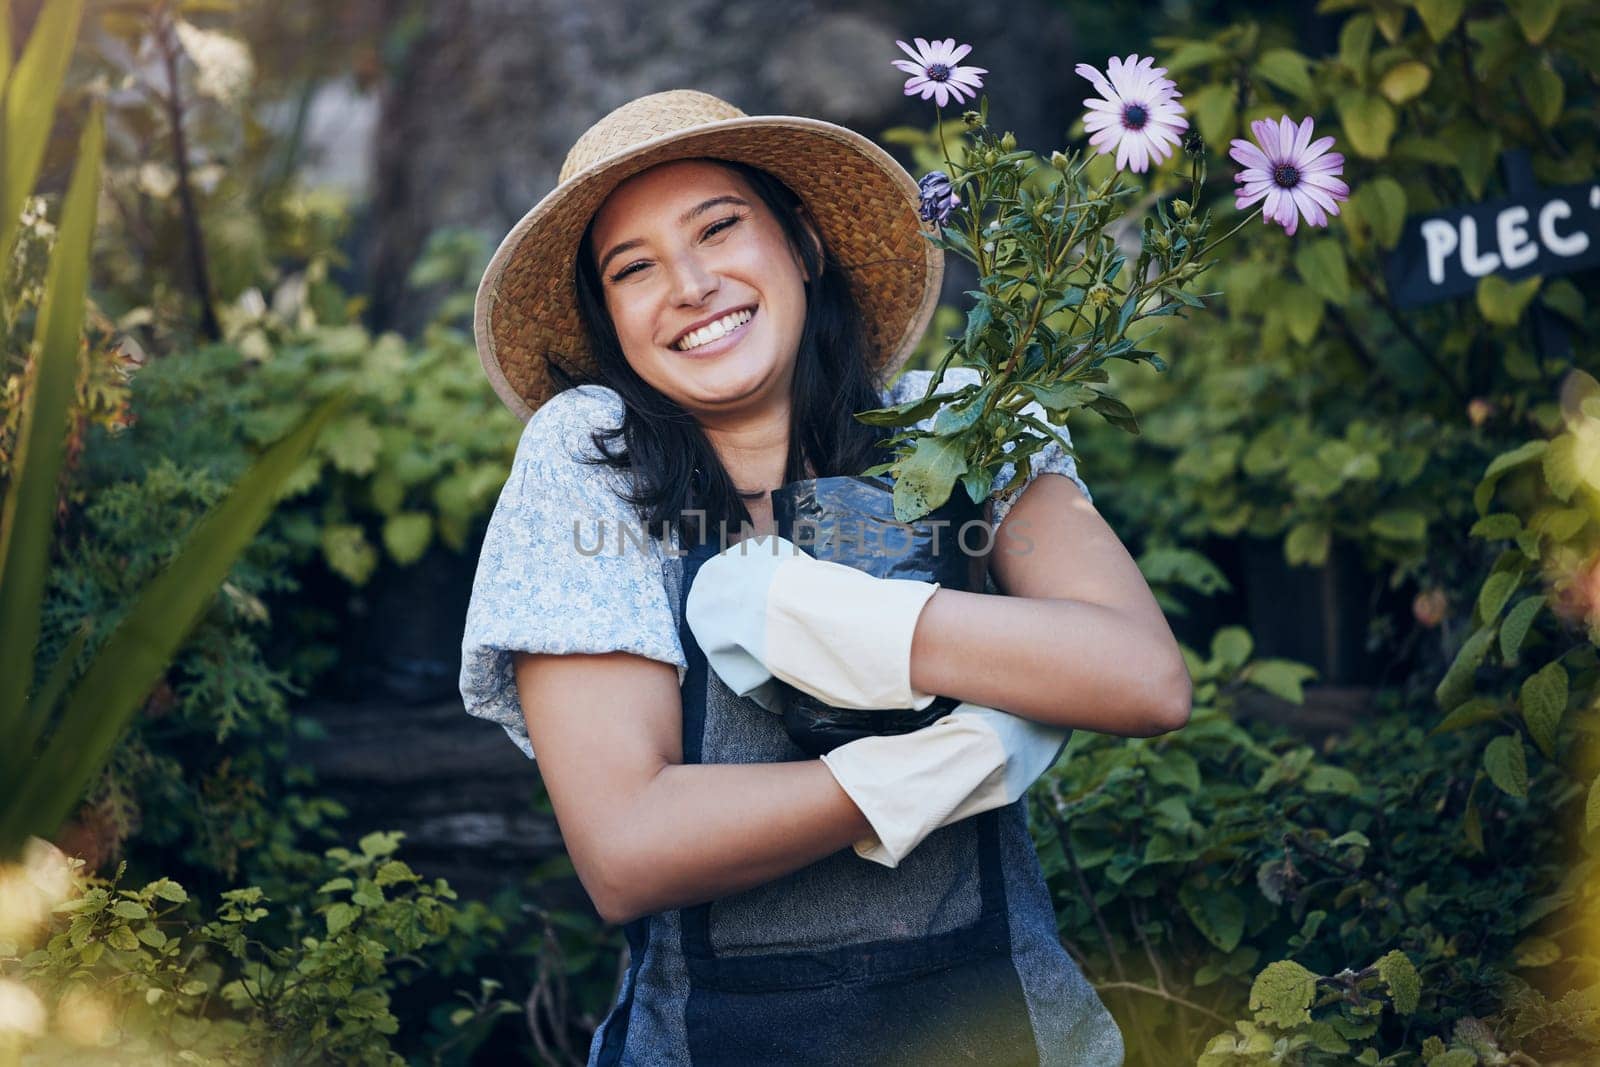 Smile, plant and portrait of woman in outdoor garden for environment, sustainability or ecology. Nature, happiness and person hug flowers for green nursery, agriculture or landscaping in backyard by YuriArcurs